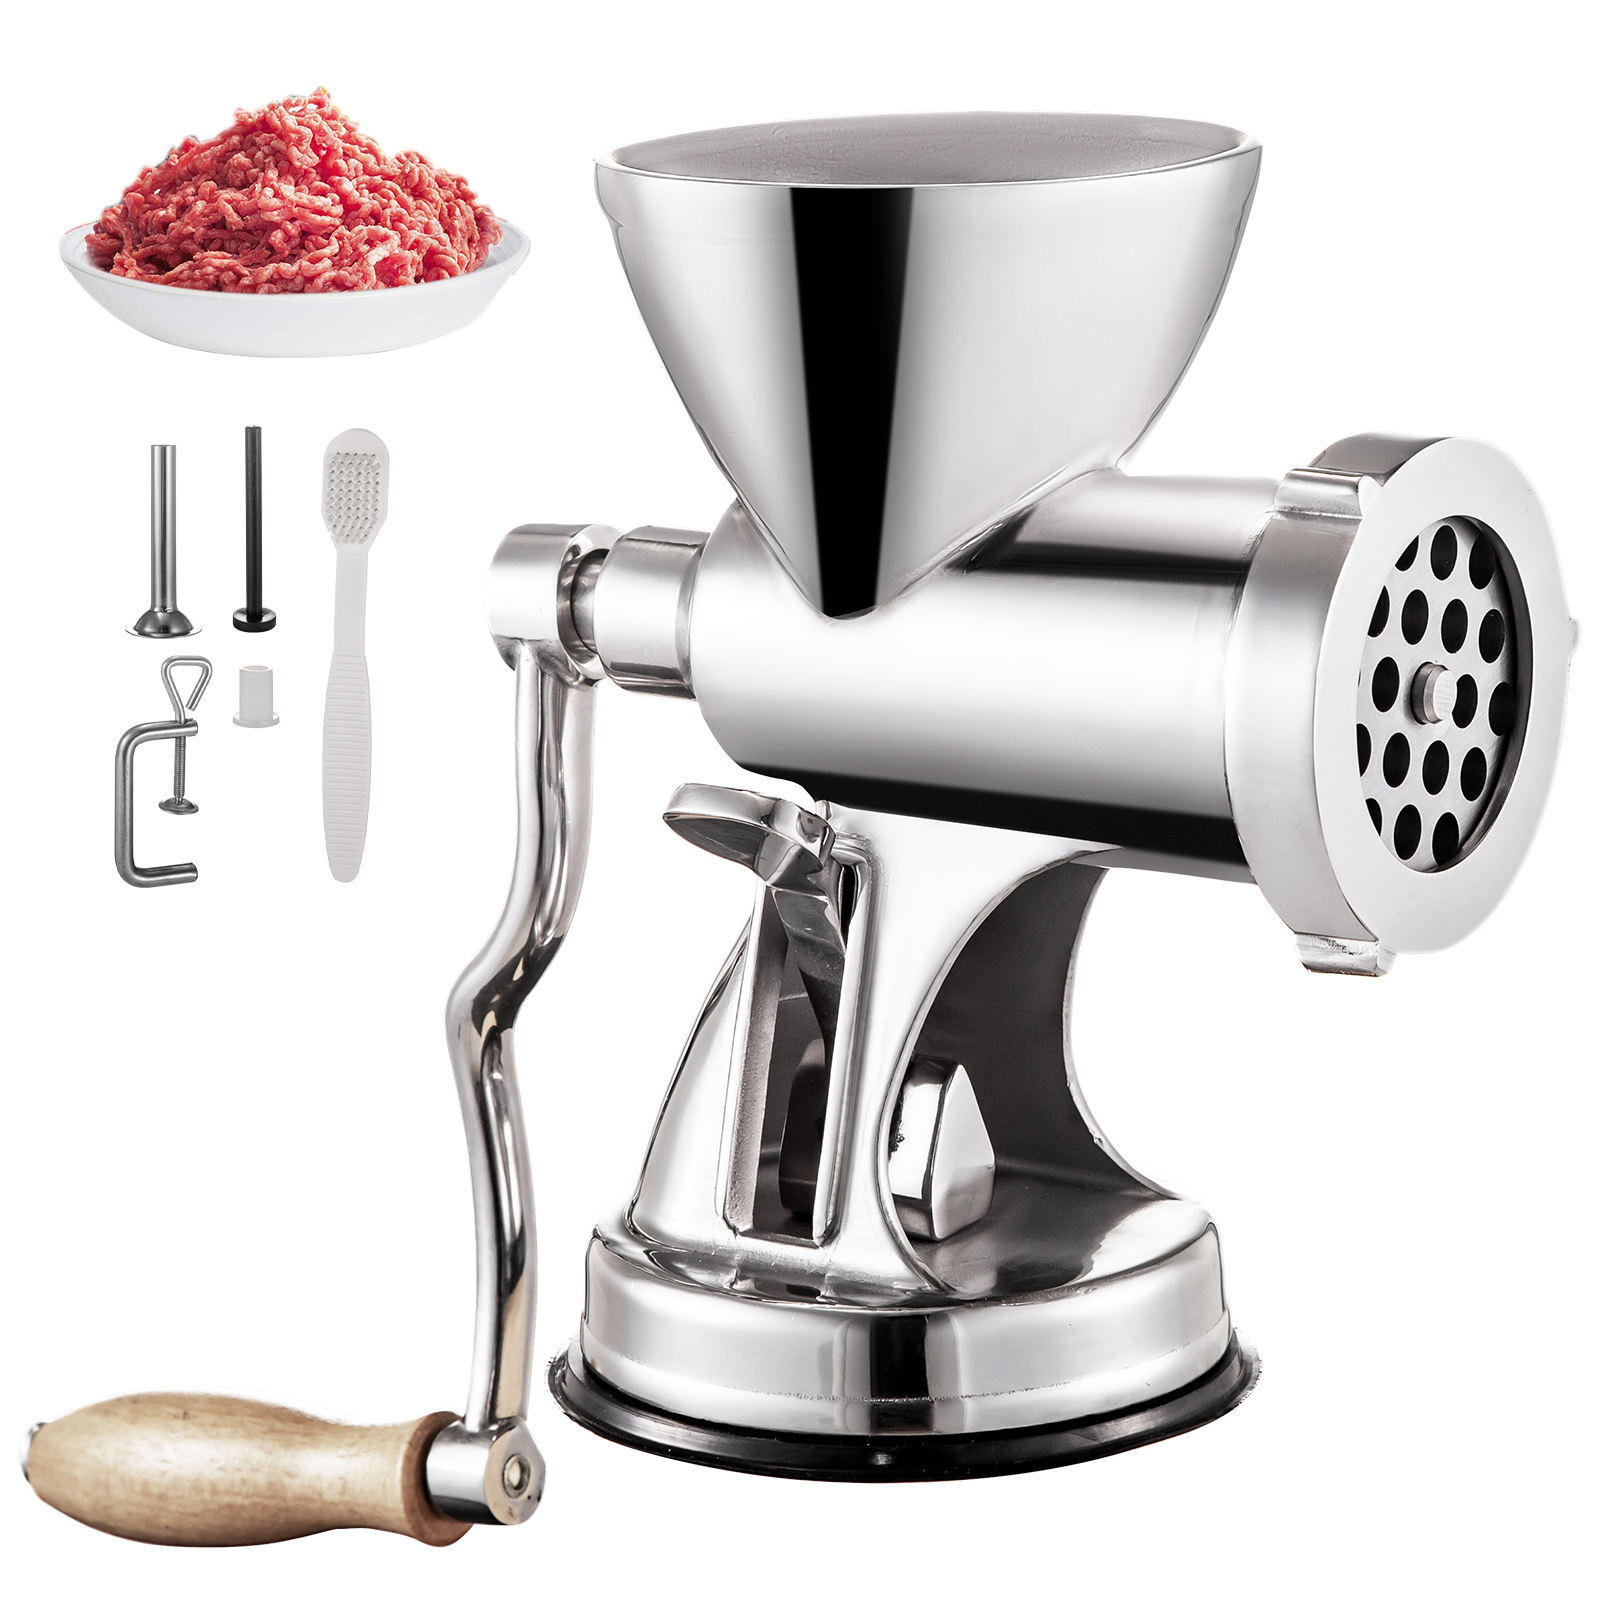 VEVOR Meat Grinder Manual 304 Stainless Steel Hand Suction Cup Base & Clamp with Filling Nozzle for Vegetables Grinding & Sausage Stuffing от Vevor Many GEOs